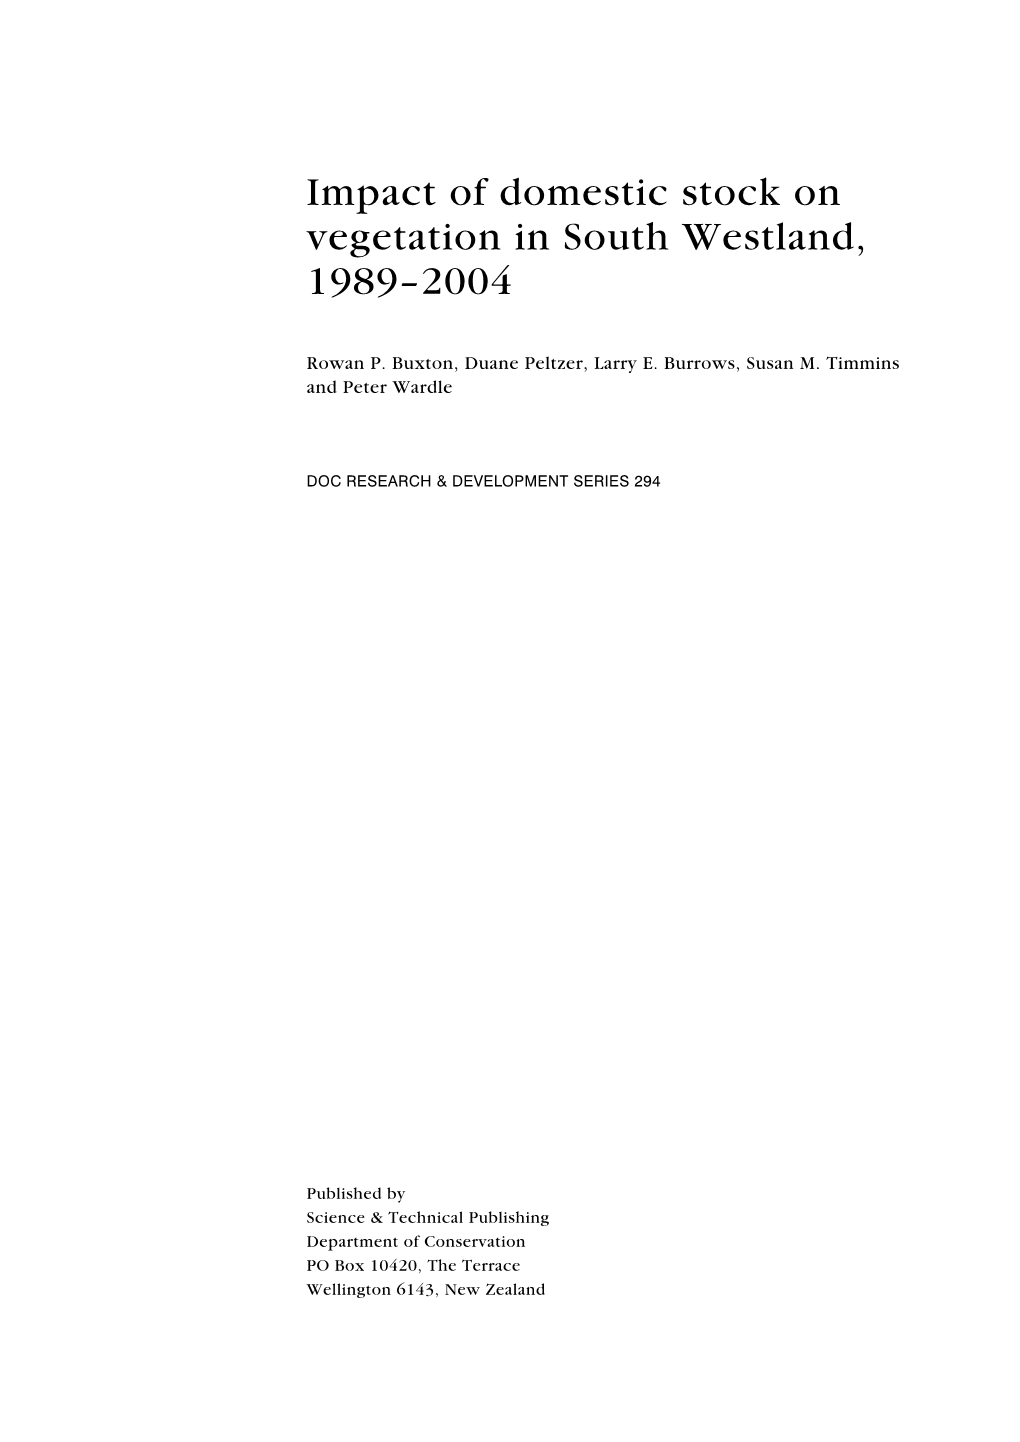 Impact of Domestic Stock on Vegetation in South Westland, 1998-2004